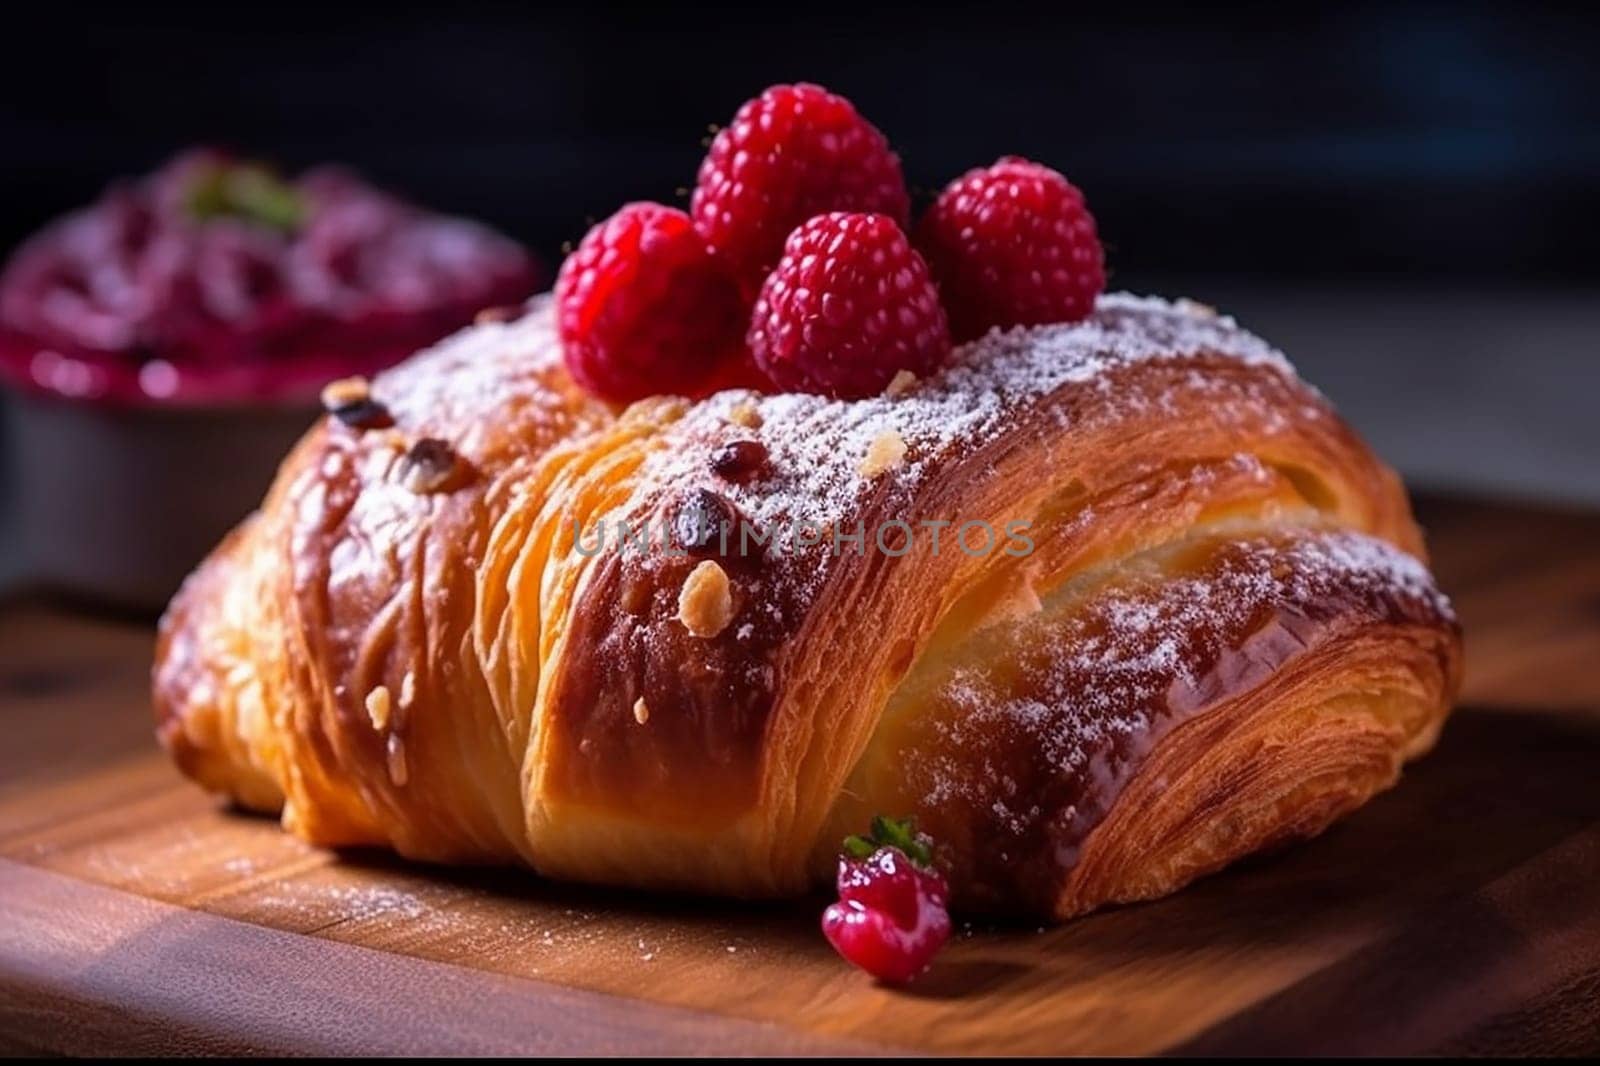 A flaky croissant topped with sugar and raspberries on a wooden surface